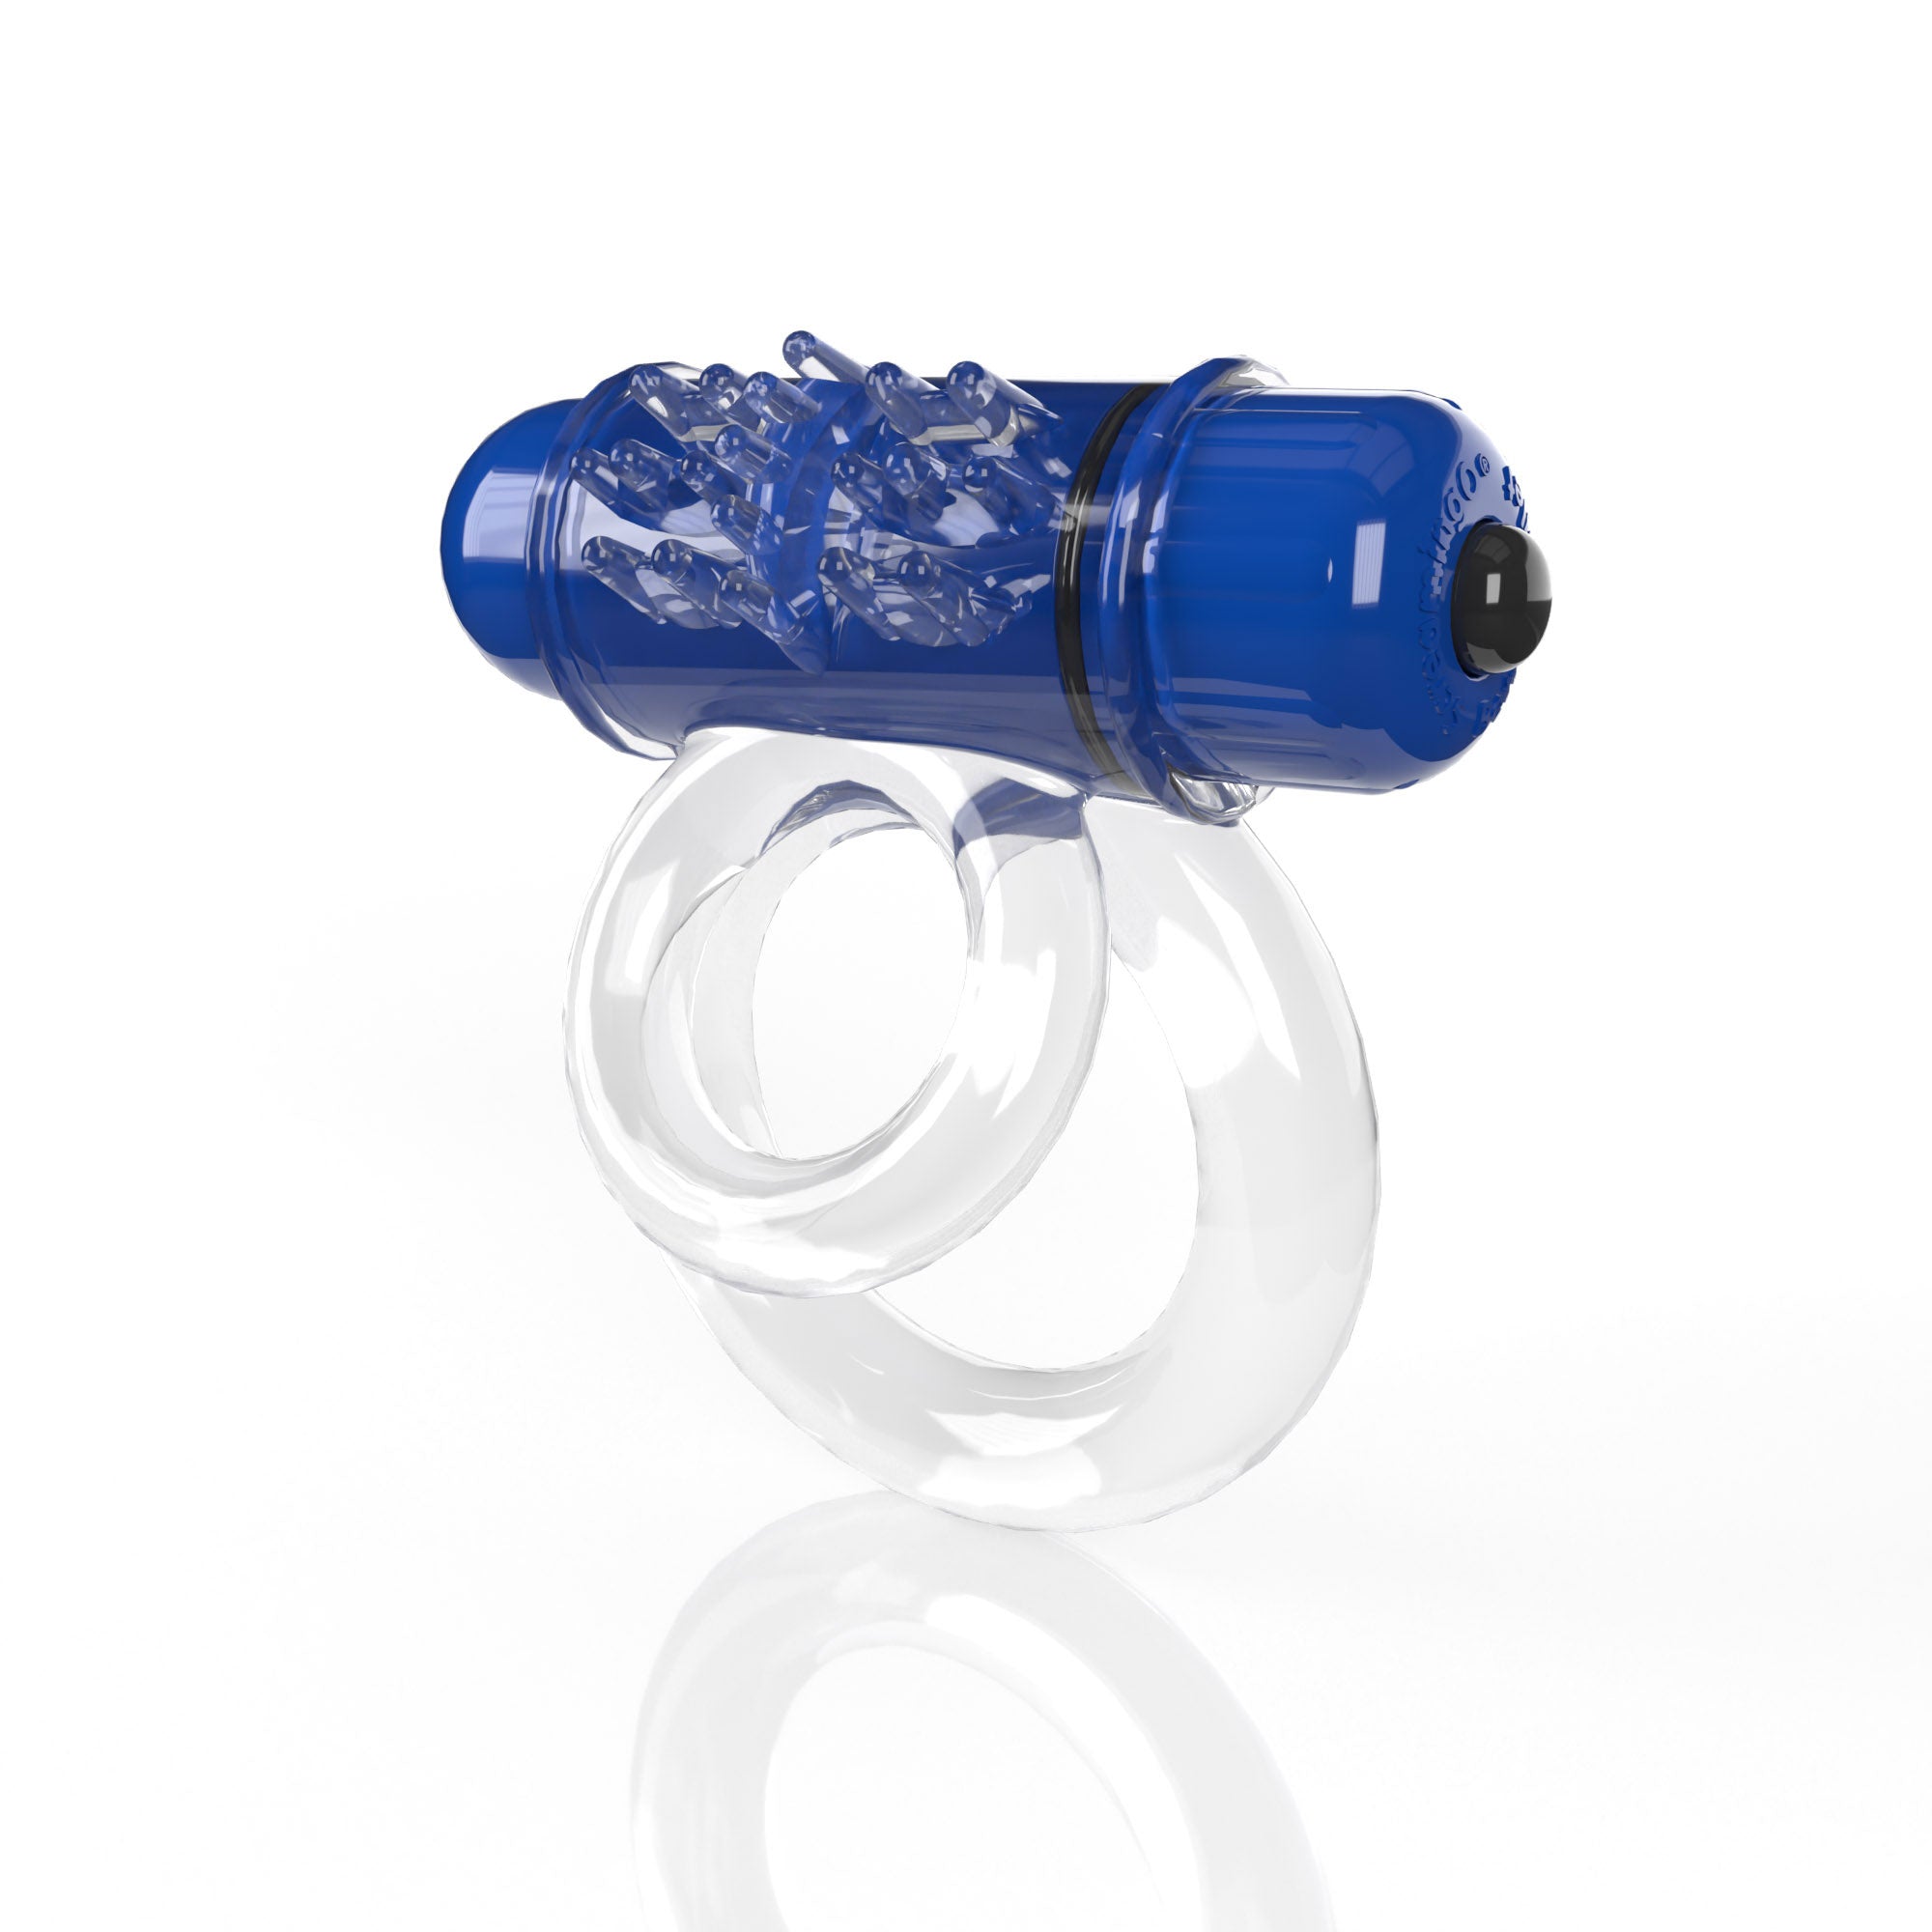 Screaming O 4b - Double O Super Powered Vibrating  Double Ring - Blueberry